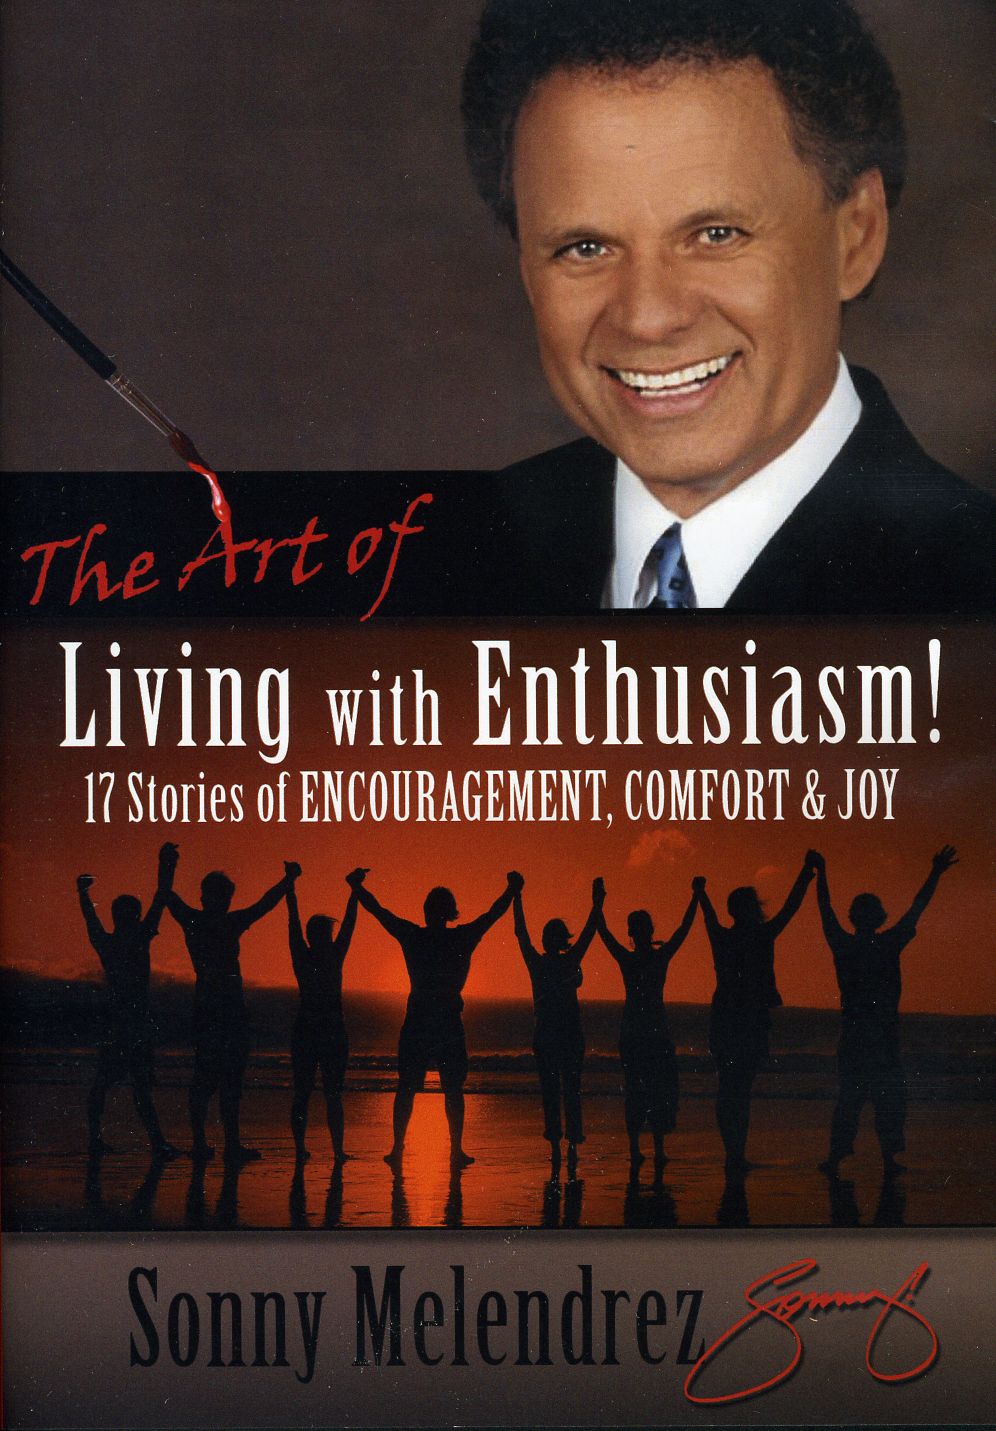 ART OF LIVING WITH ENTHUSIASM: STORIES OF ENCOURAG